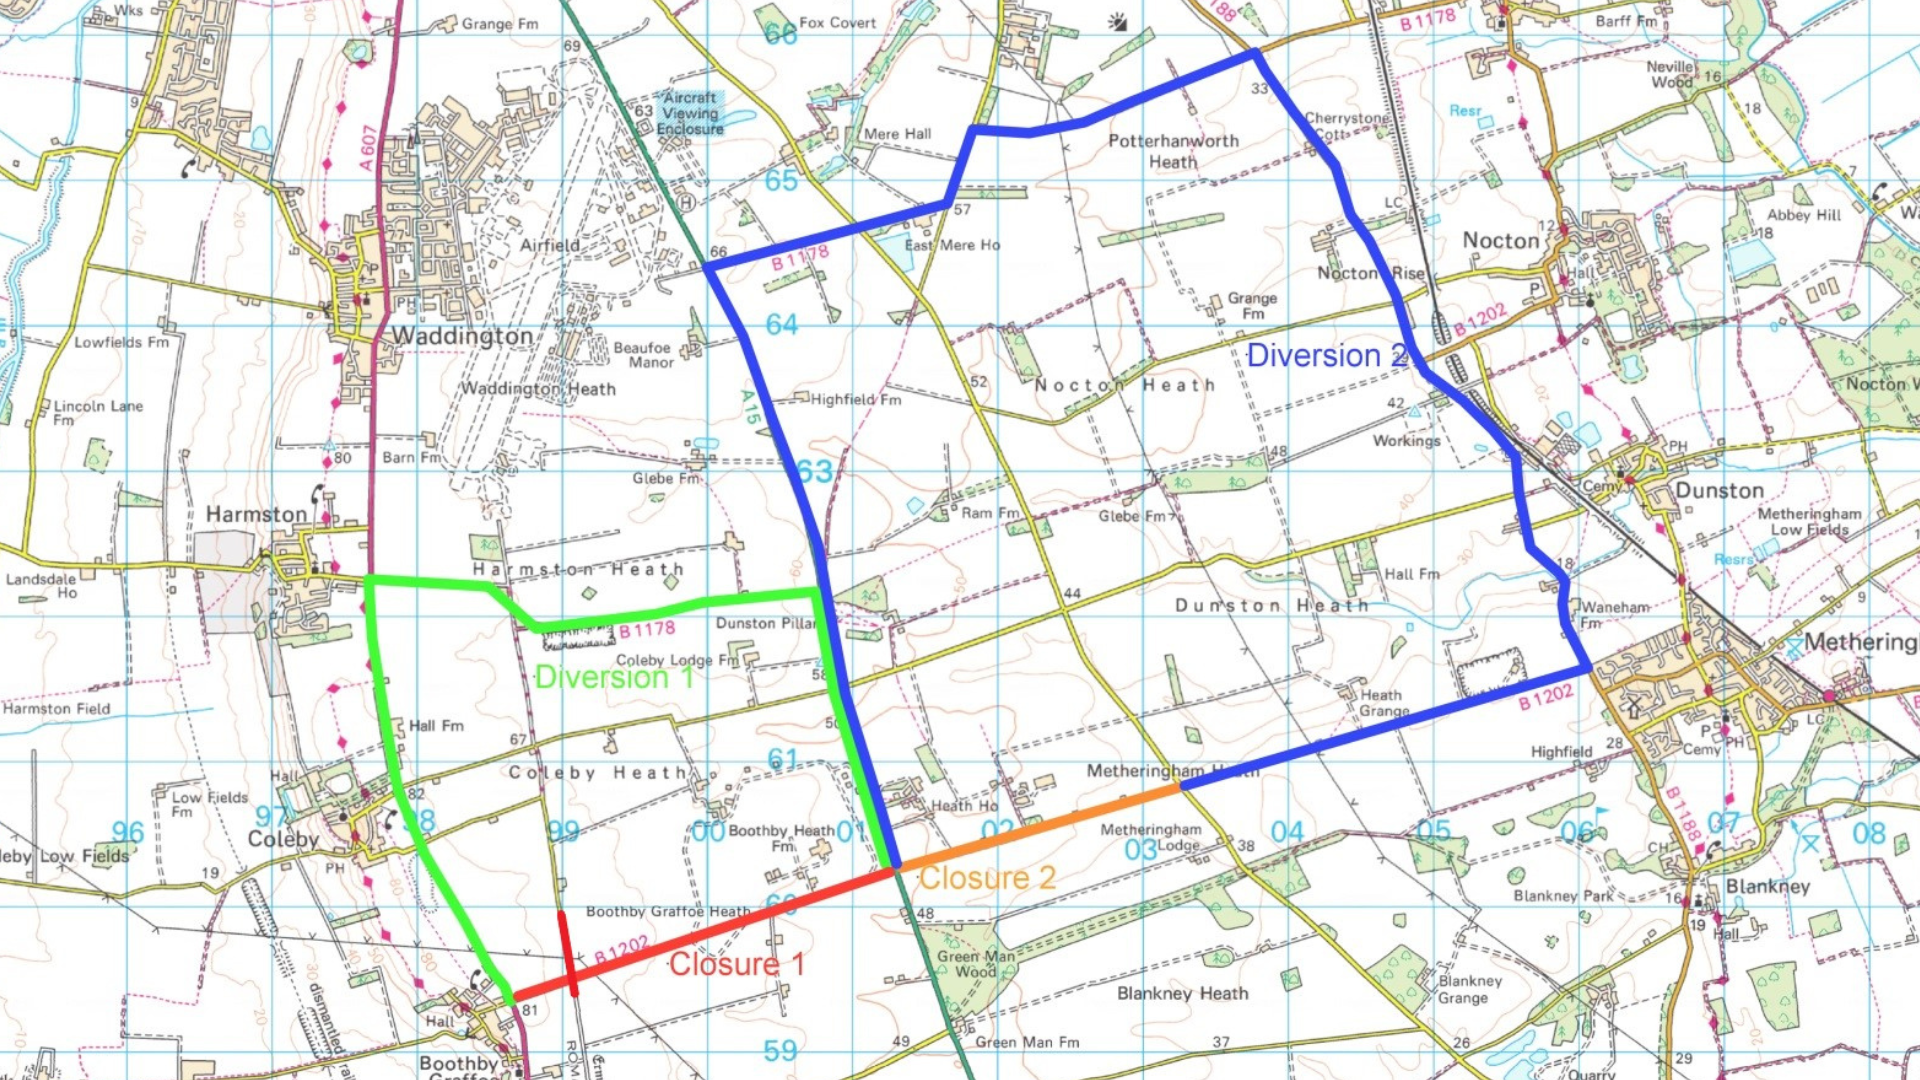 The diversion route for the Boothby Graffoe works